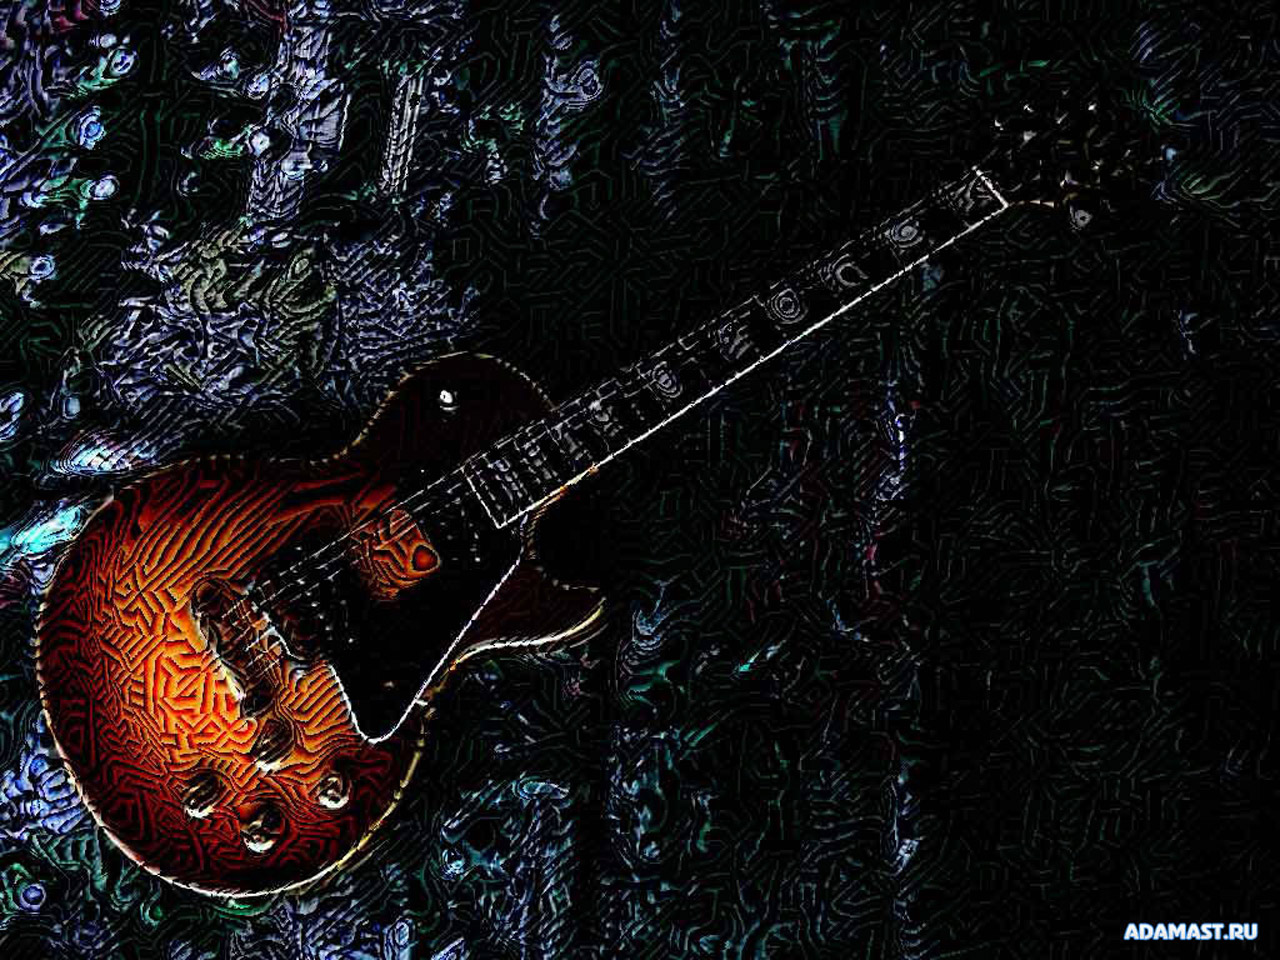 Gallery For Cool Guitars Wallpaper